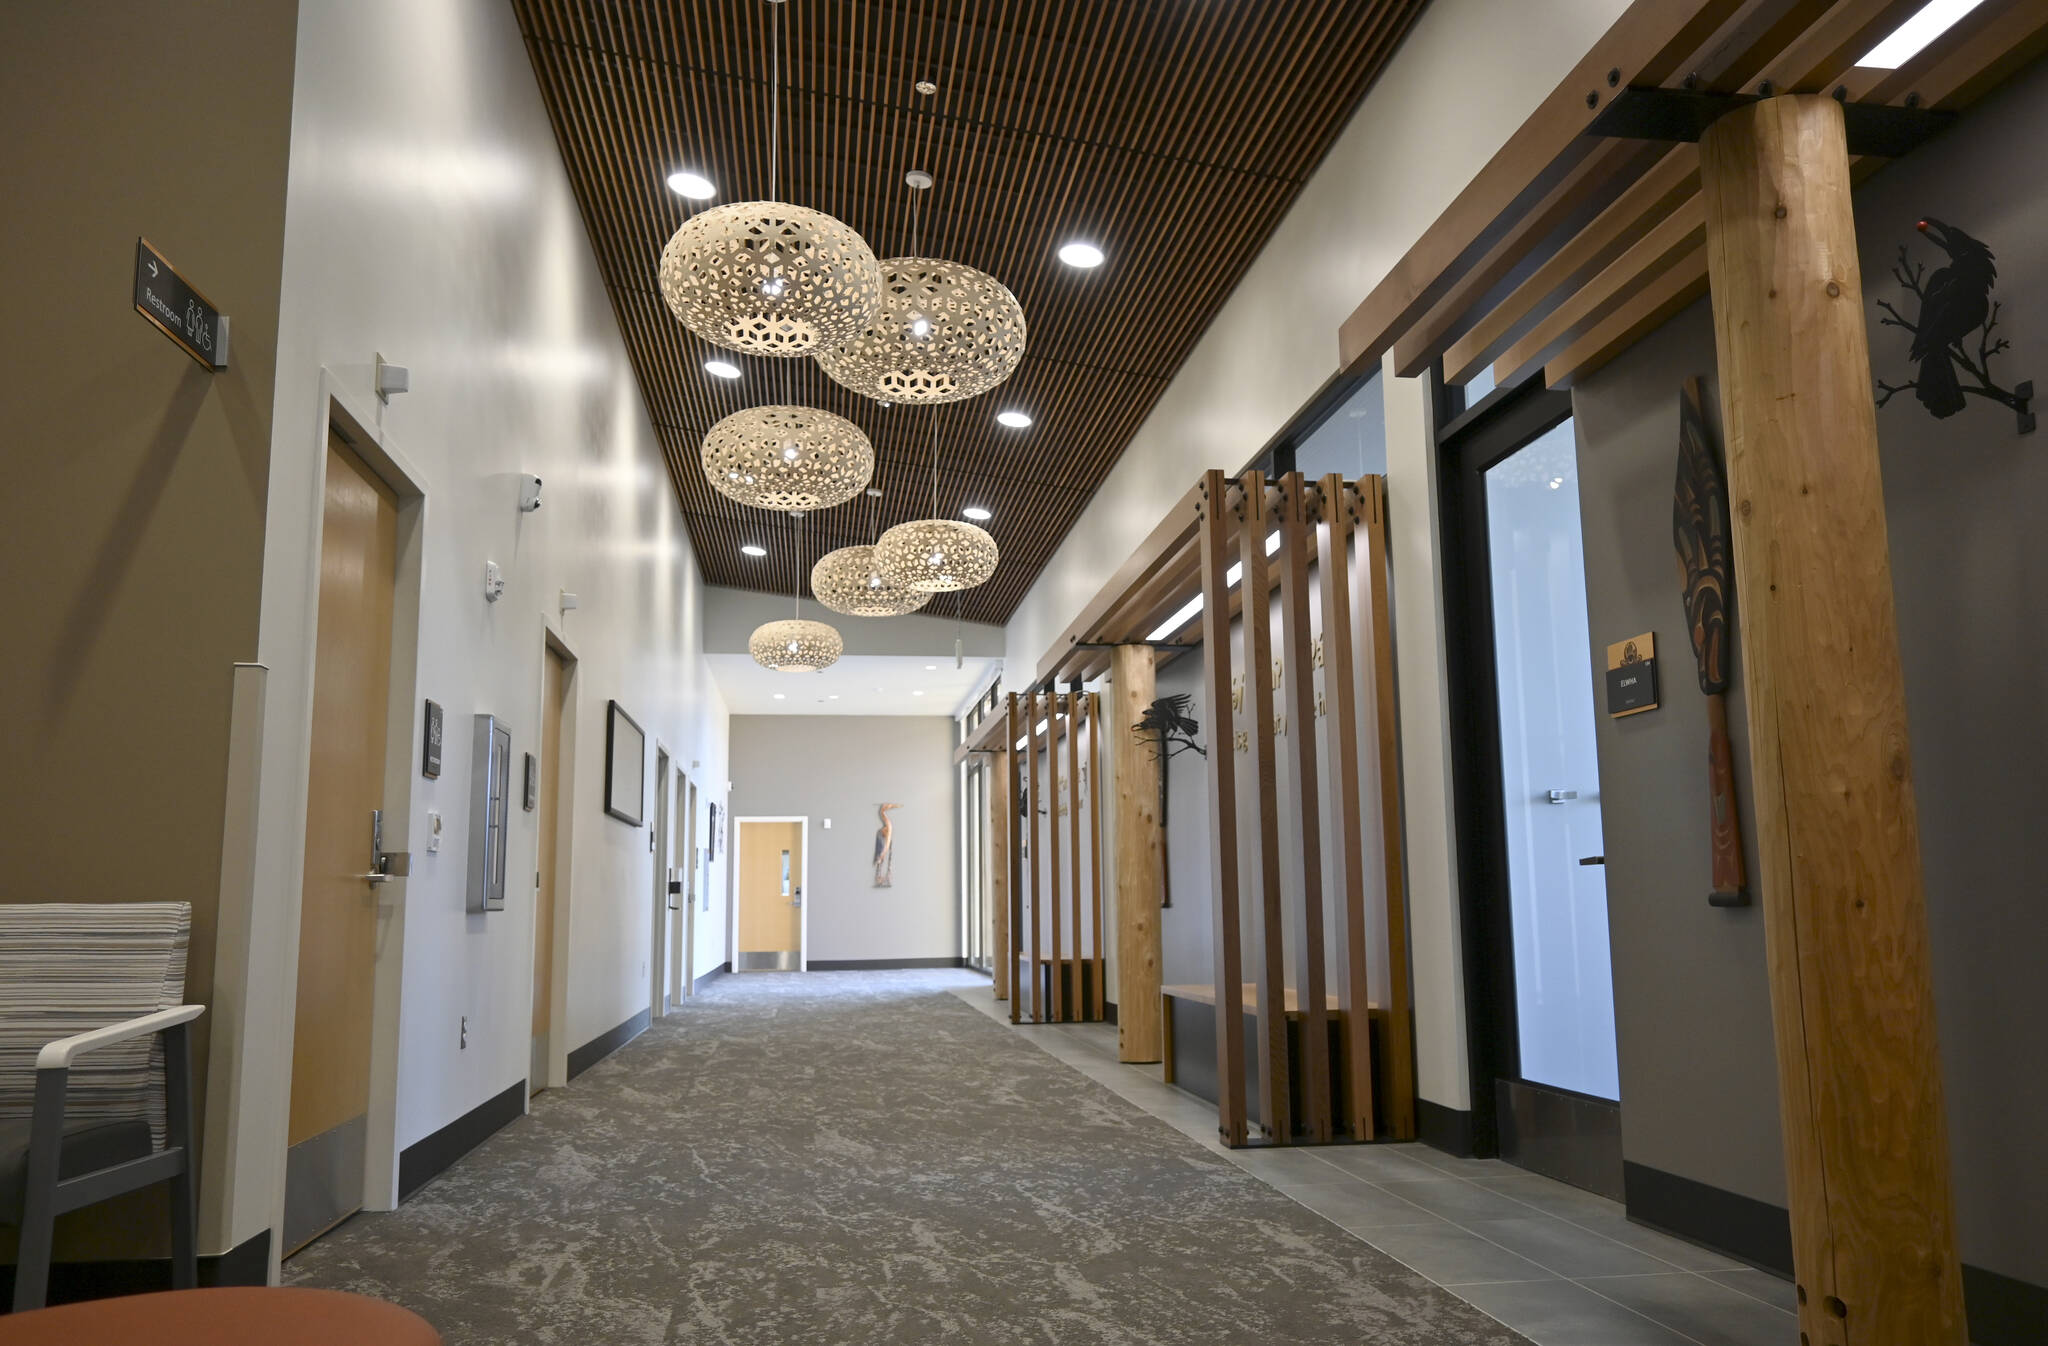 A hallway at the Jamestown S’Klallam Tribe’s Healing Clinic at 526 S. Ninth Ave. leads to several meeting rooms, where patients with opioid-use disorder (OUD) treatment receive counseling. The facility officially opens today. (Michael Dashiell/Olympic Peninsula News Group)